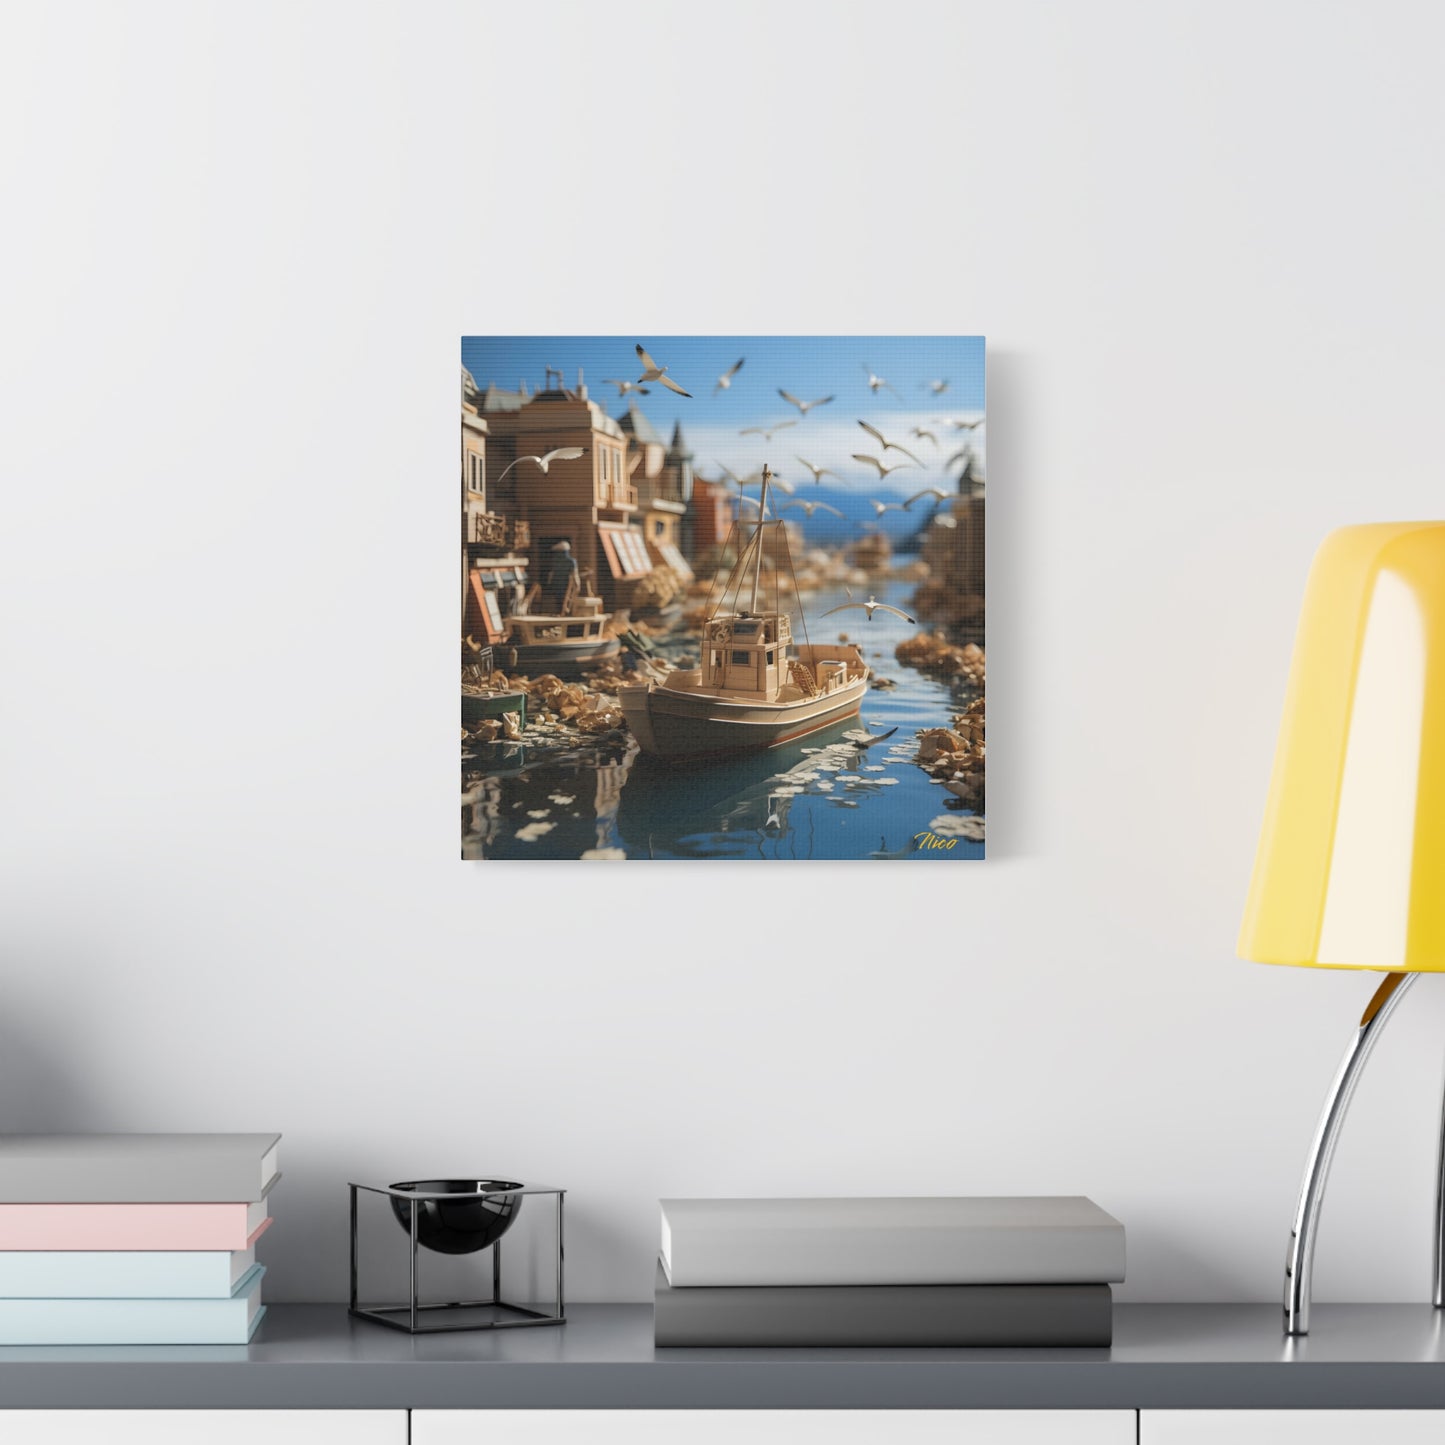 On The Docks By The Bay Series Print #3 - Streched Matte Canvas Print, 1.25" Thick